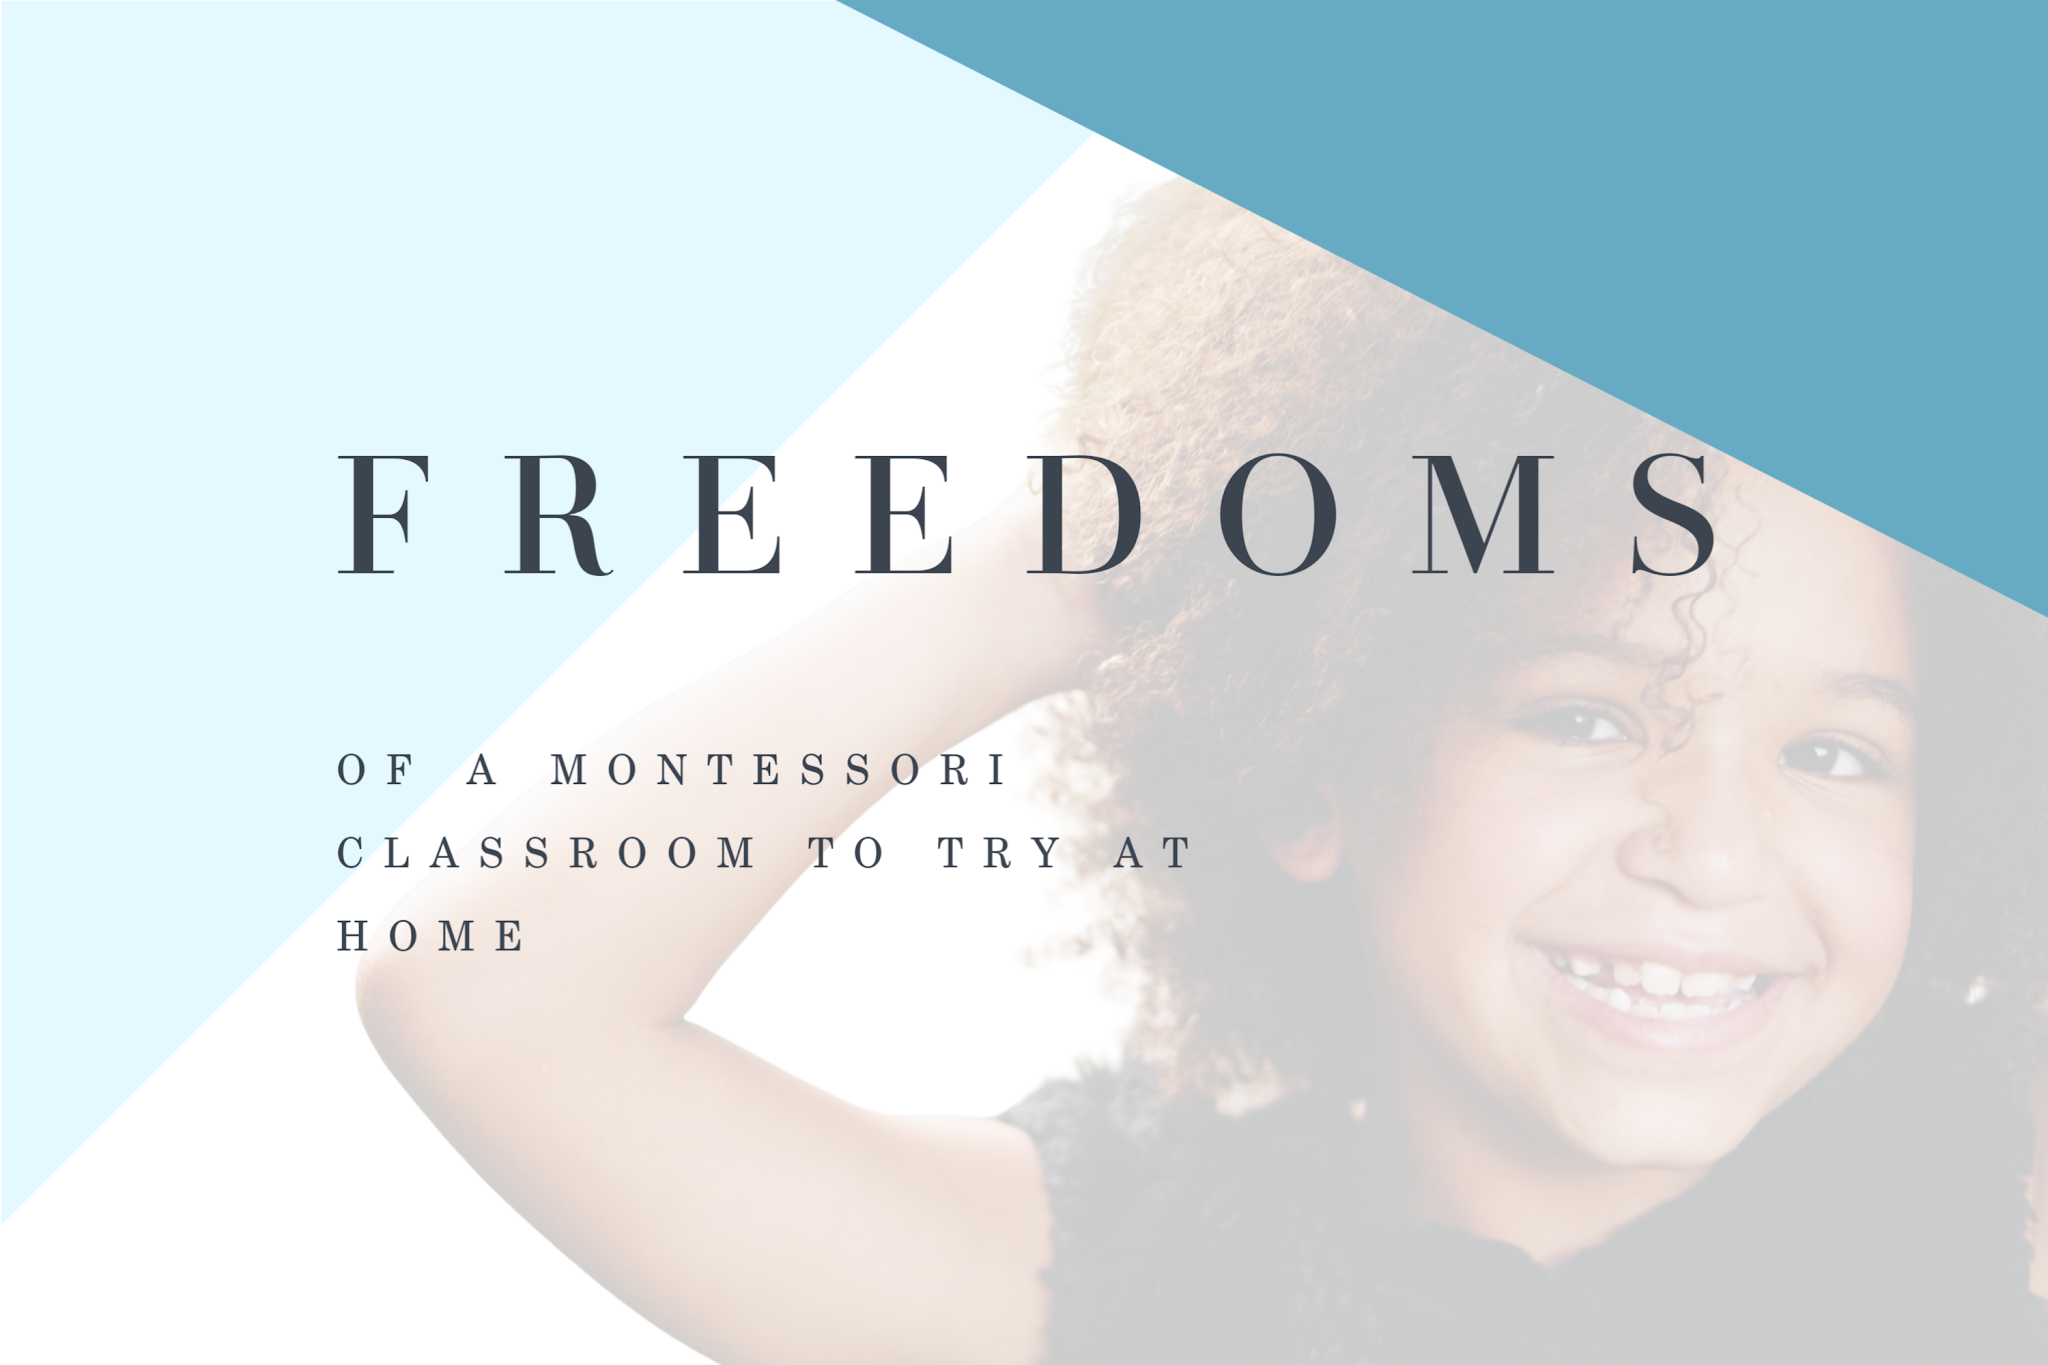 Discover the Montessori Freedoms and Try Them at Home